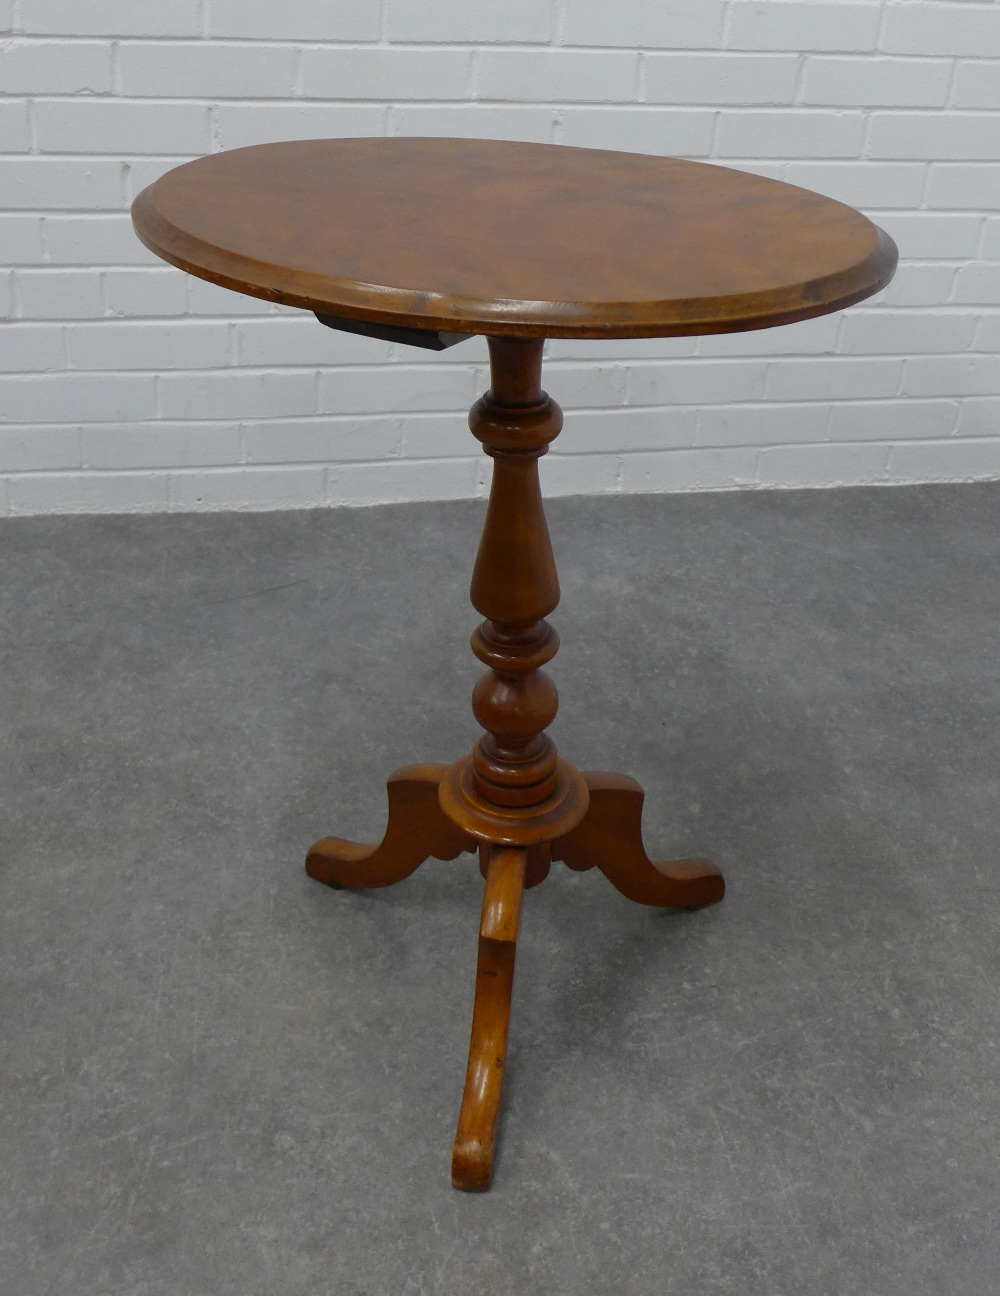 Mahogany pedestal table with an oval top and outswept tripod legs, 72 x 55 x 43cm.